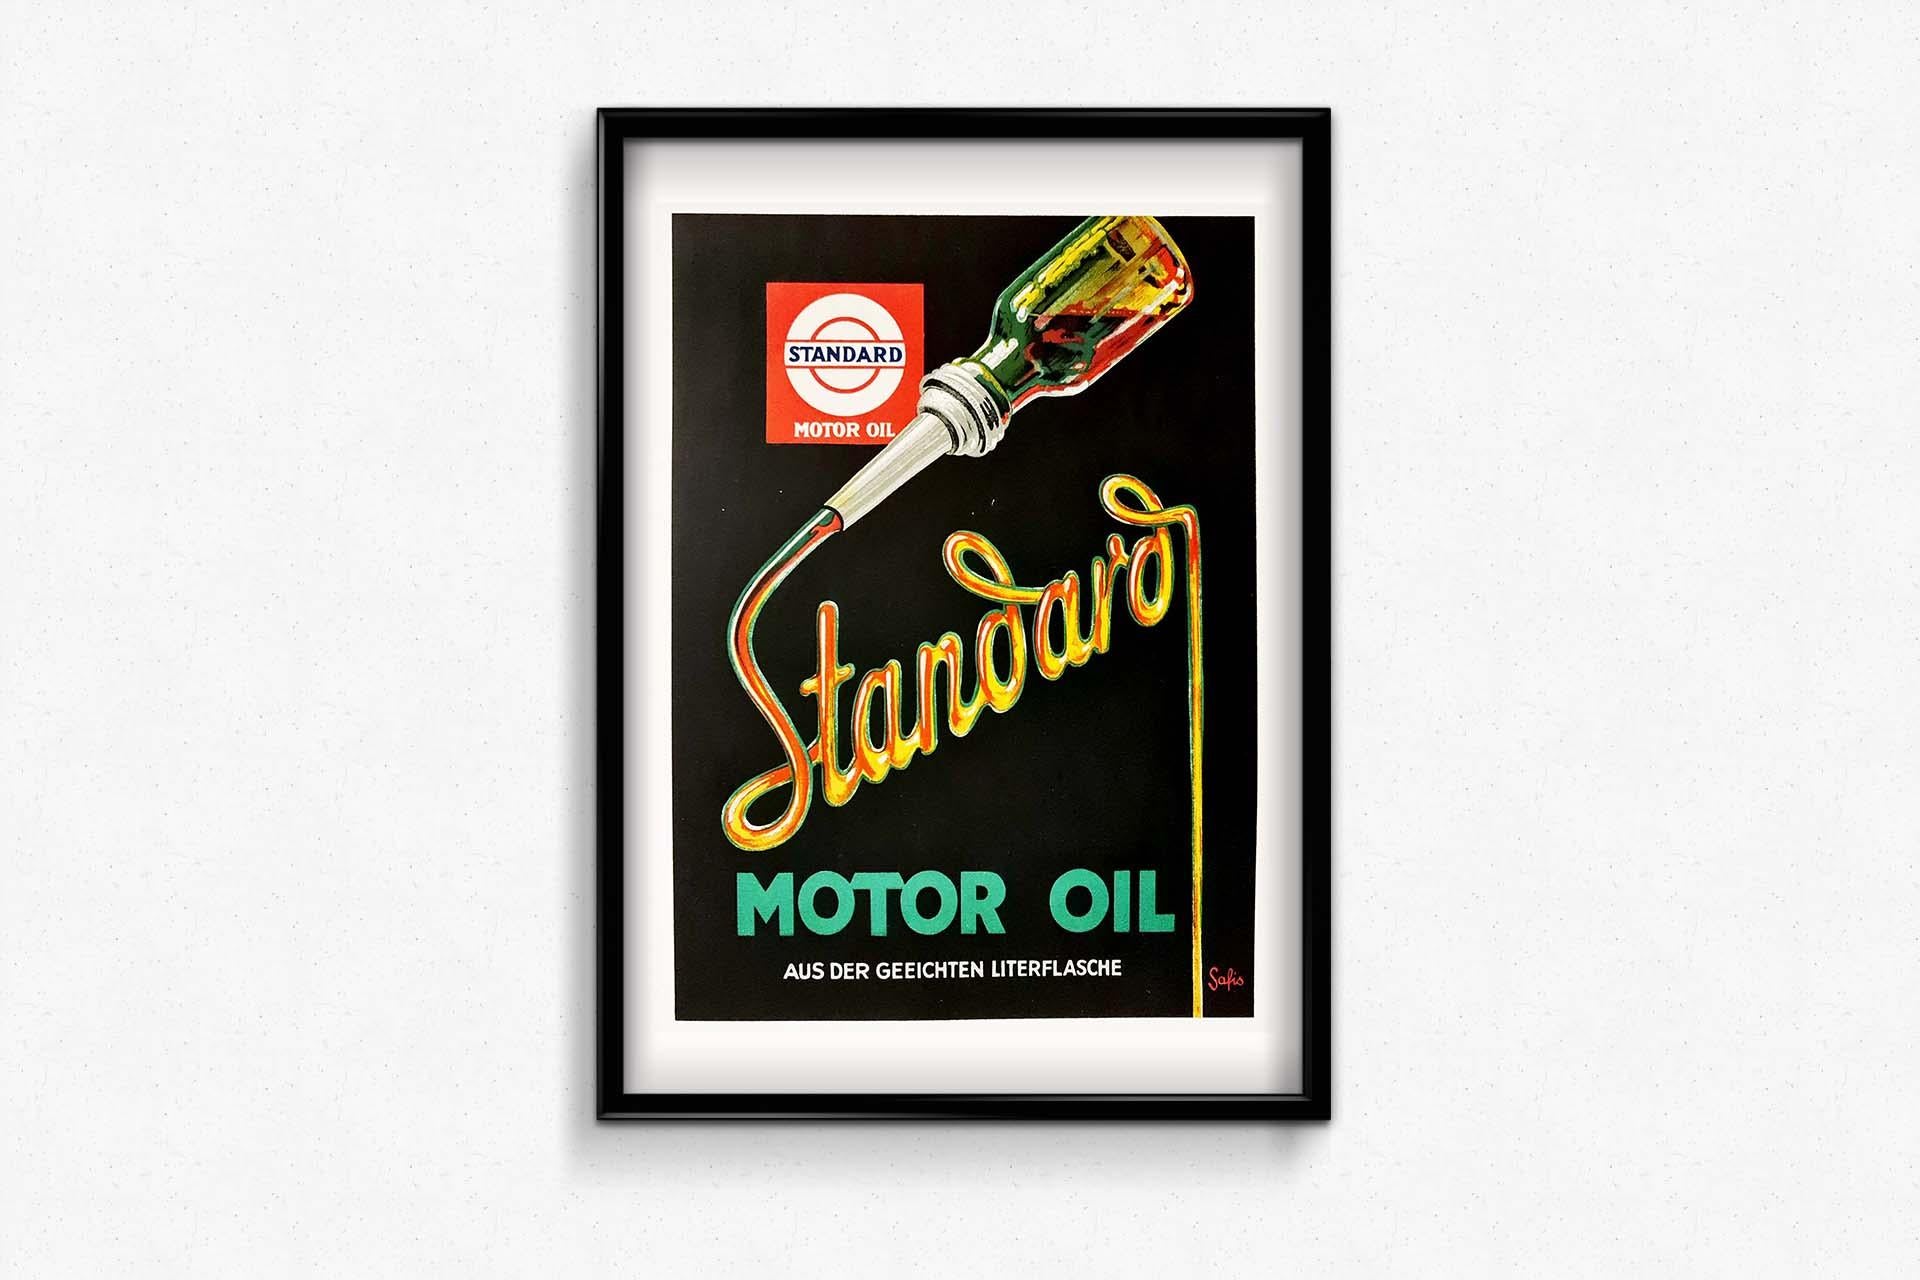 Poster designed by Johannes Safis in 1928 - Standard Motor Oil advertisement For Sale 3